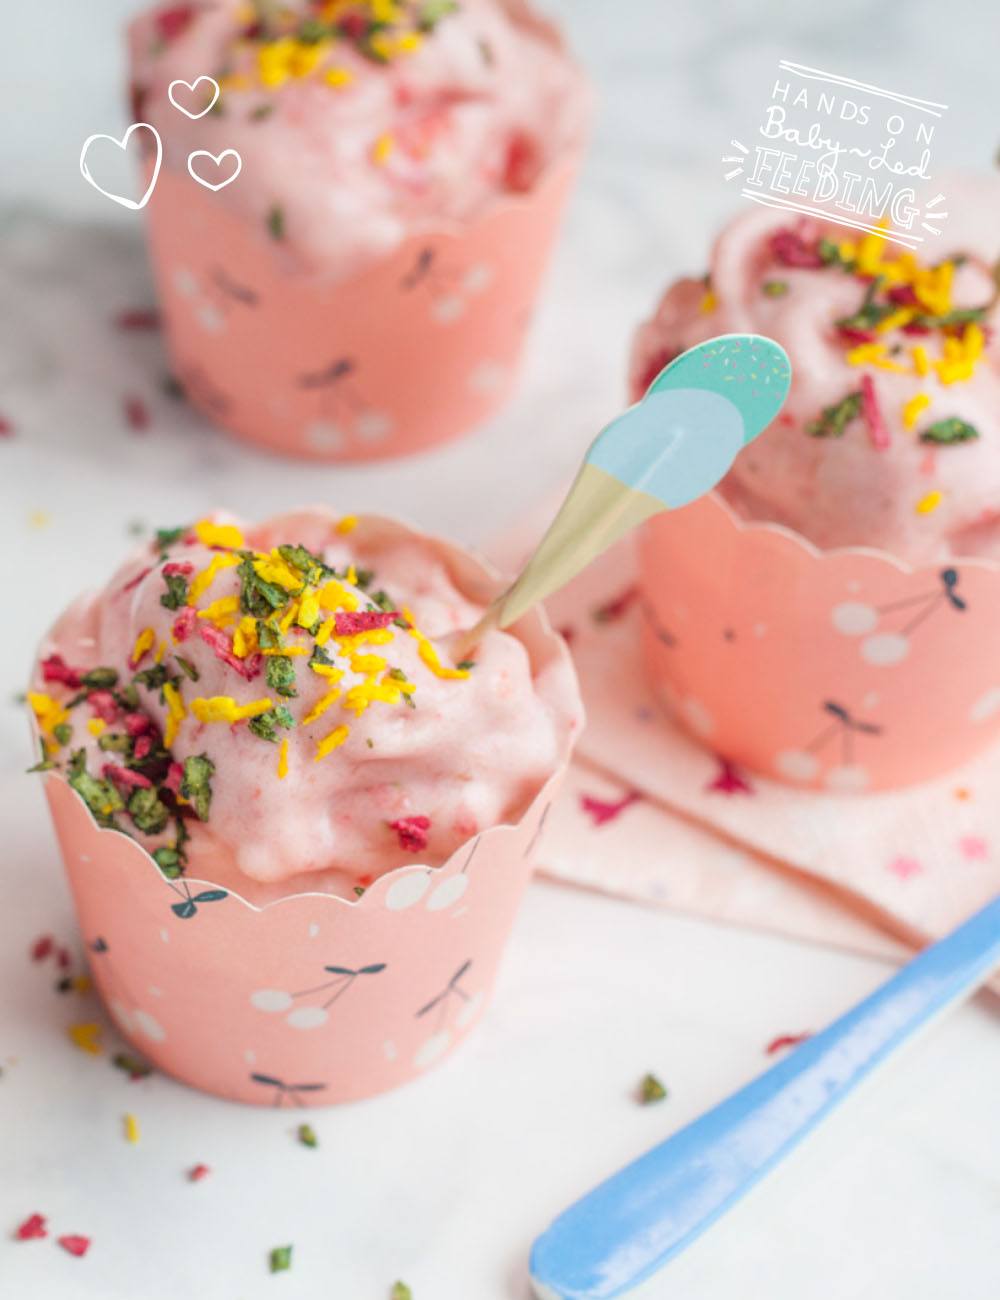 Super Healthy Sugar Free Sprinkles. Cute for little kids and so healthy and nutritious. Long image of zoomed in ice cream with sprinkles. A perfect healthy treat for kids on a summers day. Easy to make and so nutritious, refined sugar free treat packed with goodness.